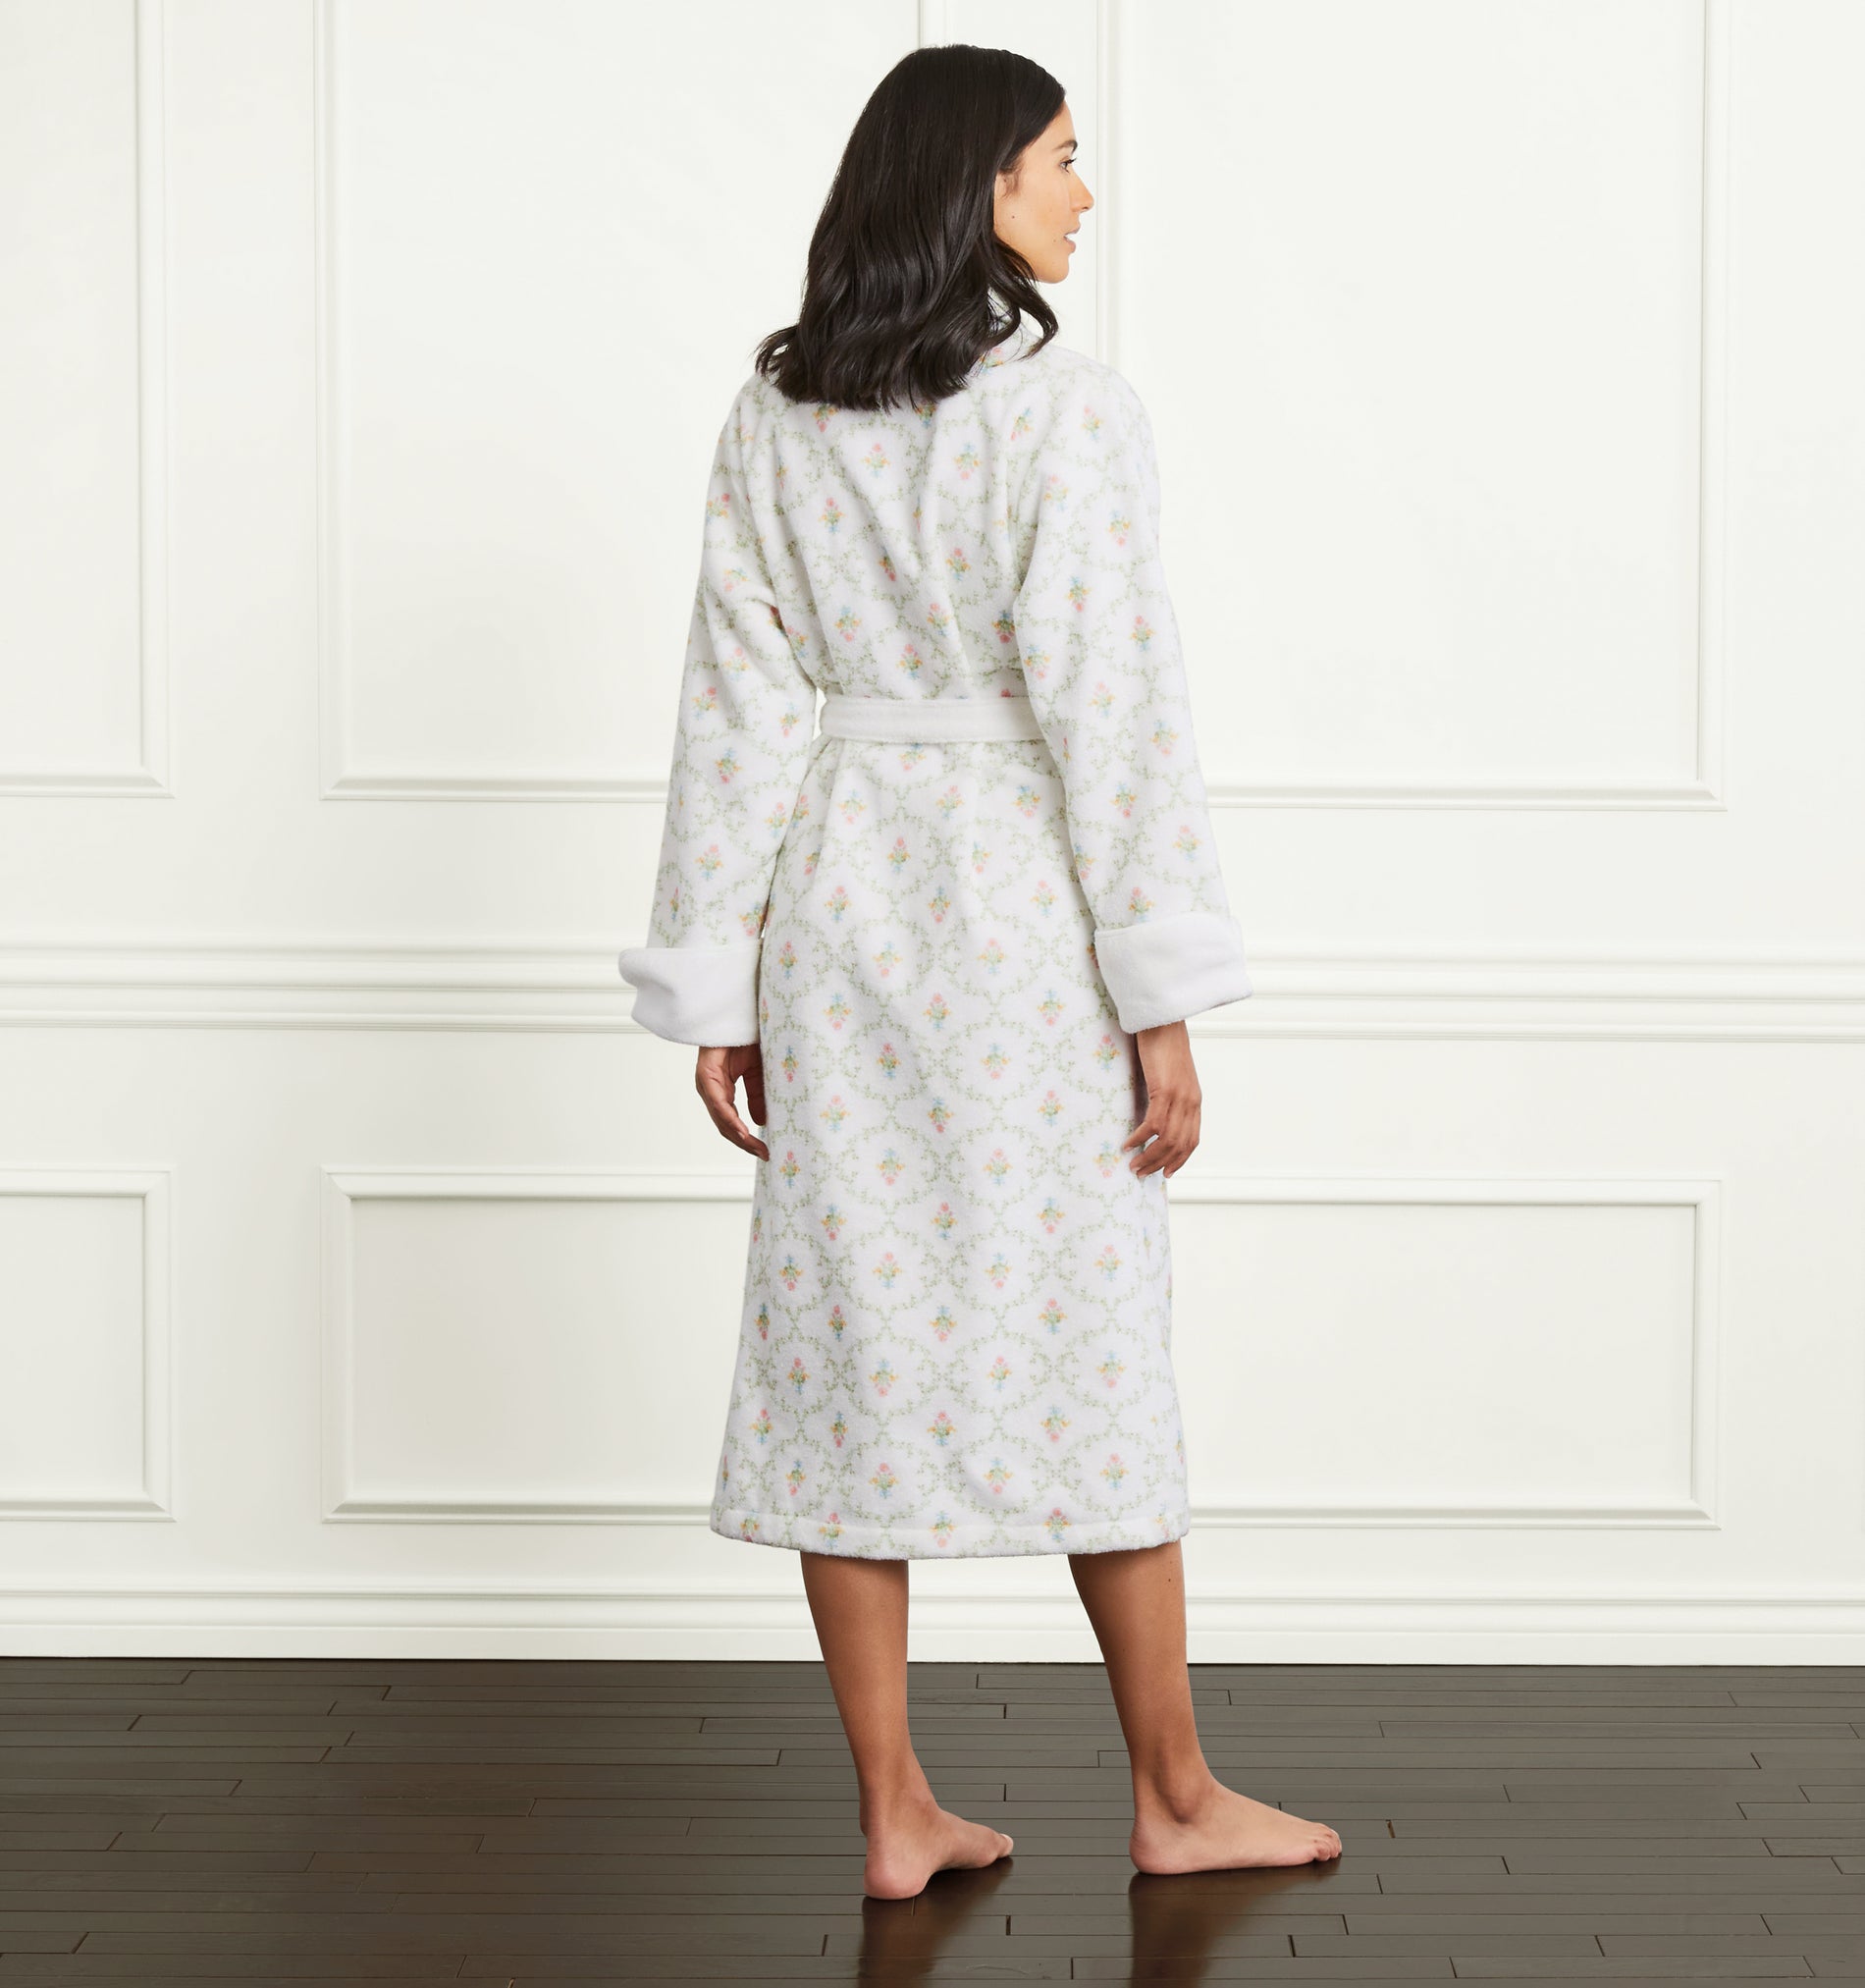 What are the Best Bathrobes?